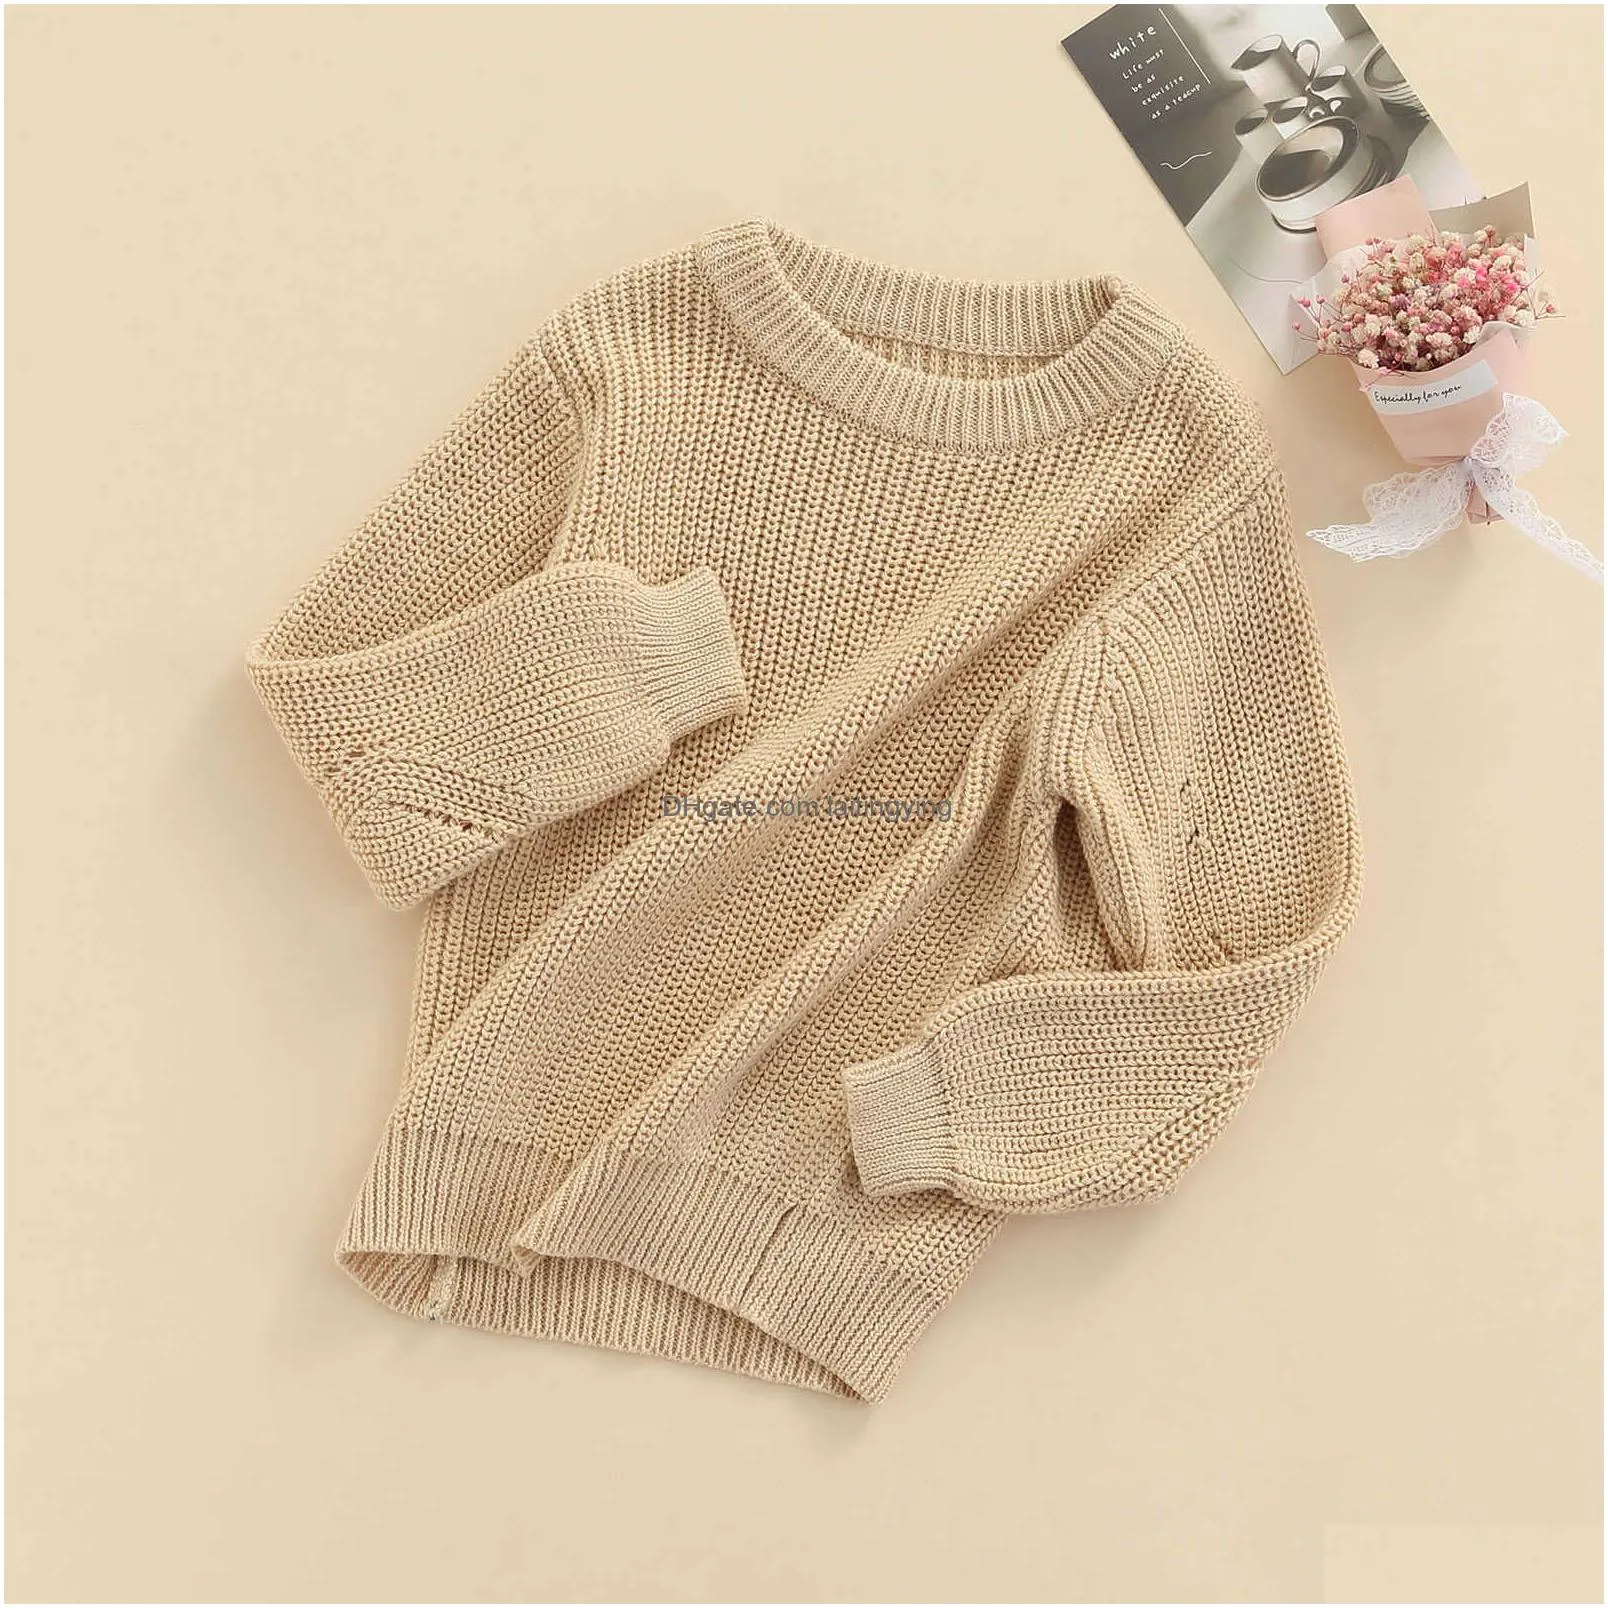 infant solid color sweater kids autumn winter casual long sleeve round neck knit pullover y1024